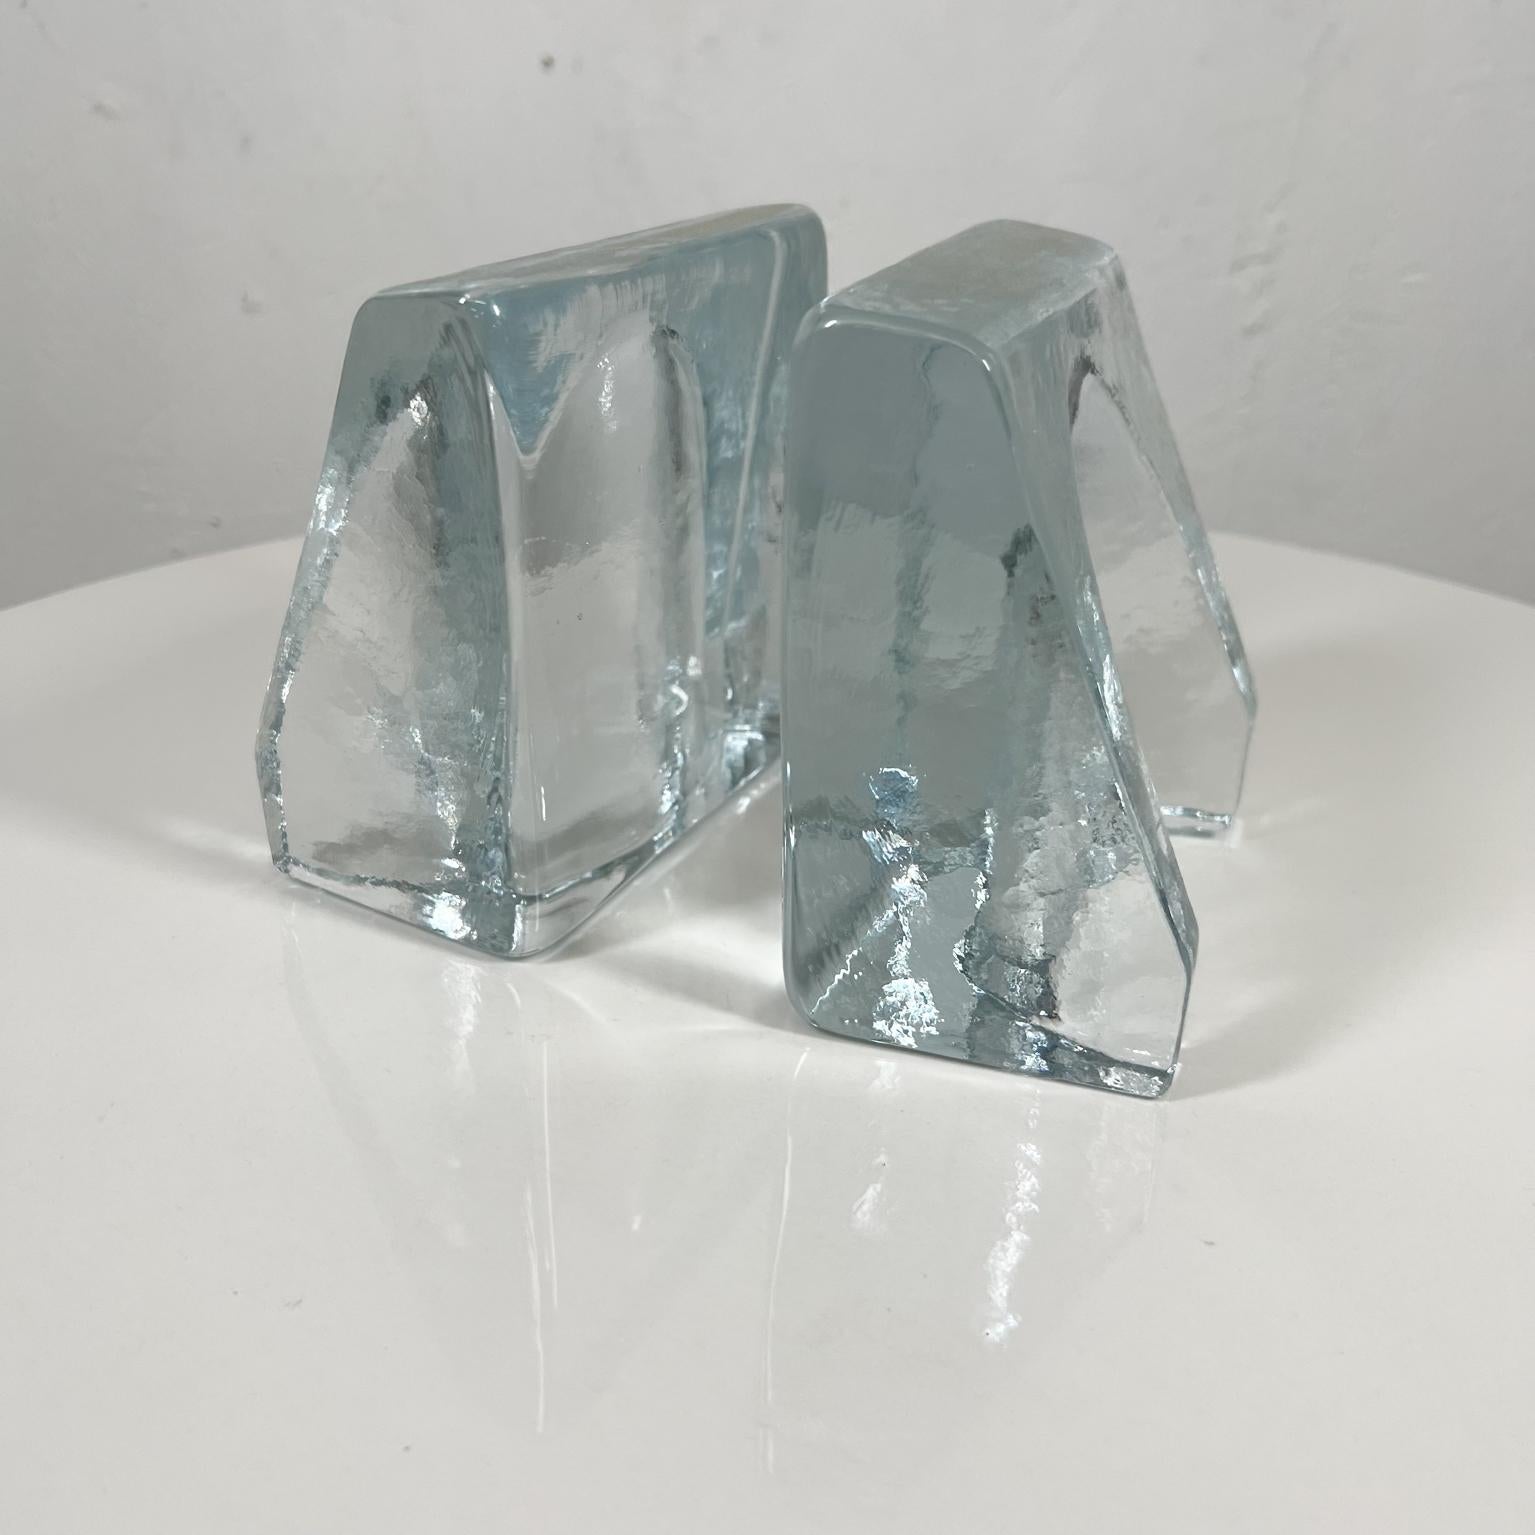 Mid-20th Century 1960s Modernist Sculptural Clear Glass Wedge Bookends Wayne Husted Blenko WV